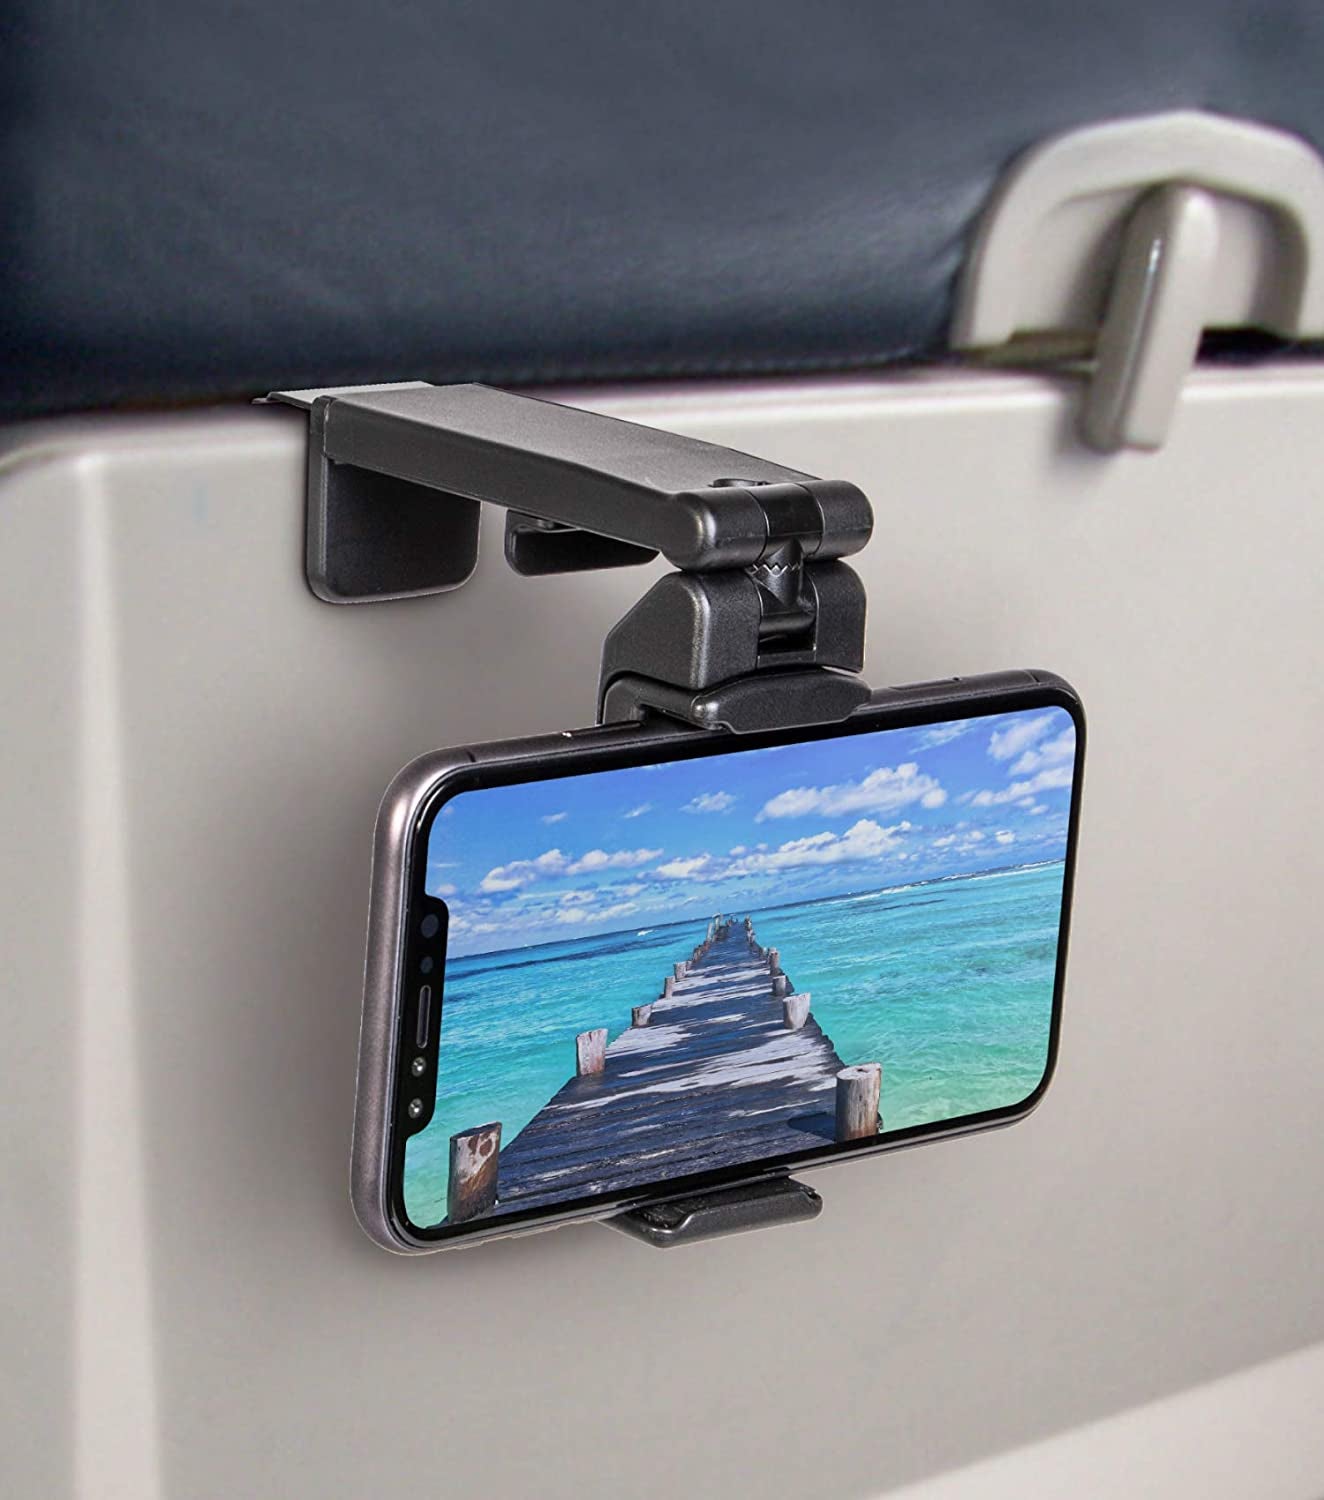 the mount attached to an airline tray table